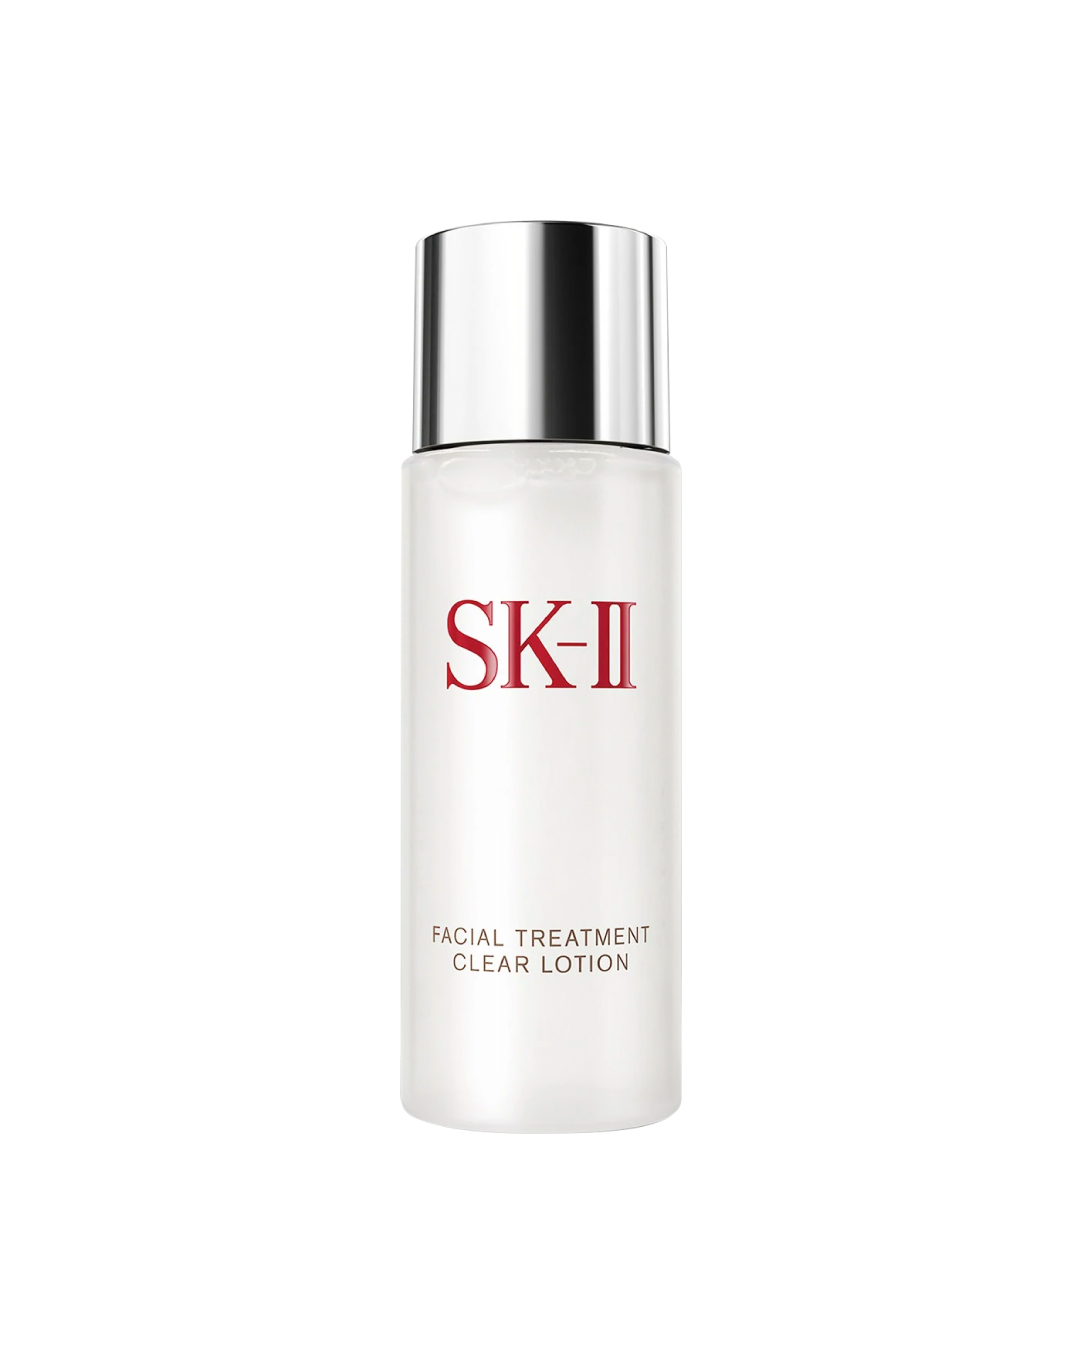 SK-II Facial Treatment Clear Lotion (30ml) - Best Buy World Philippines